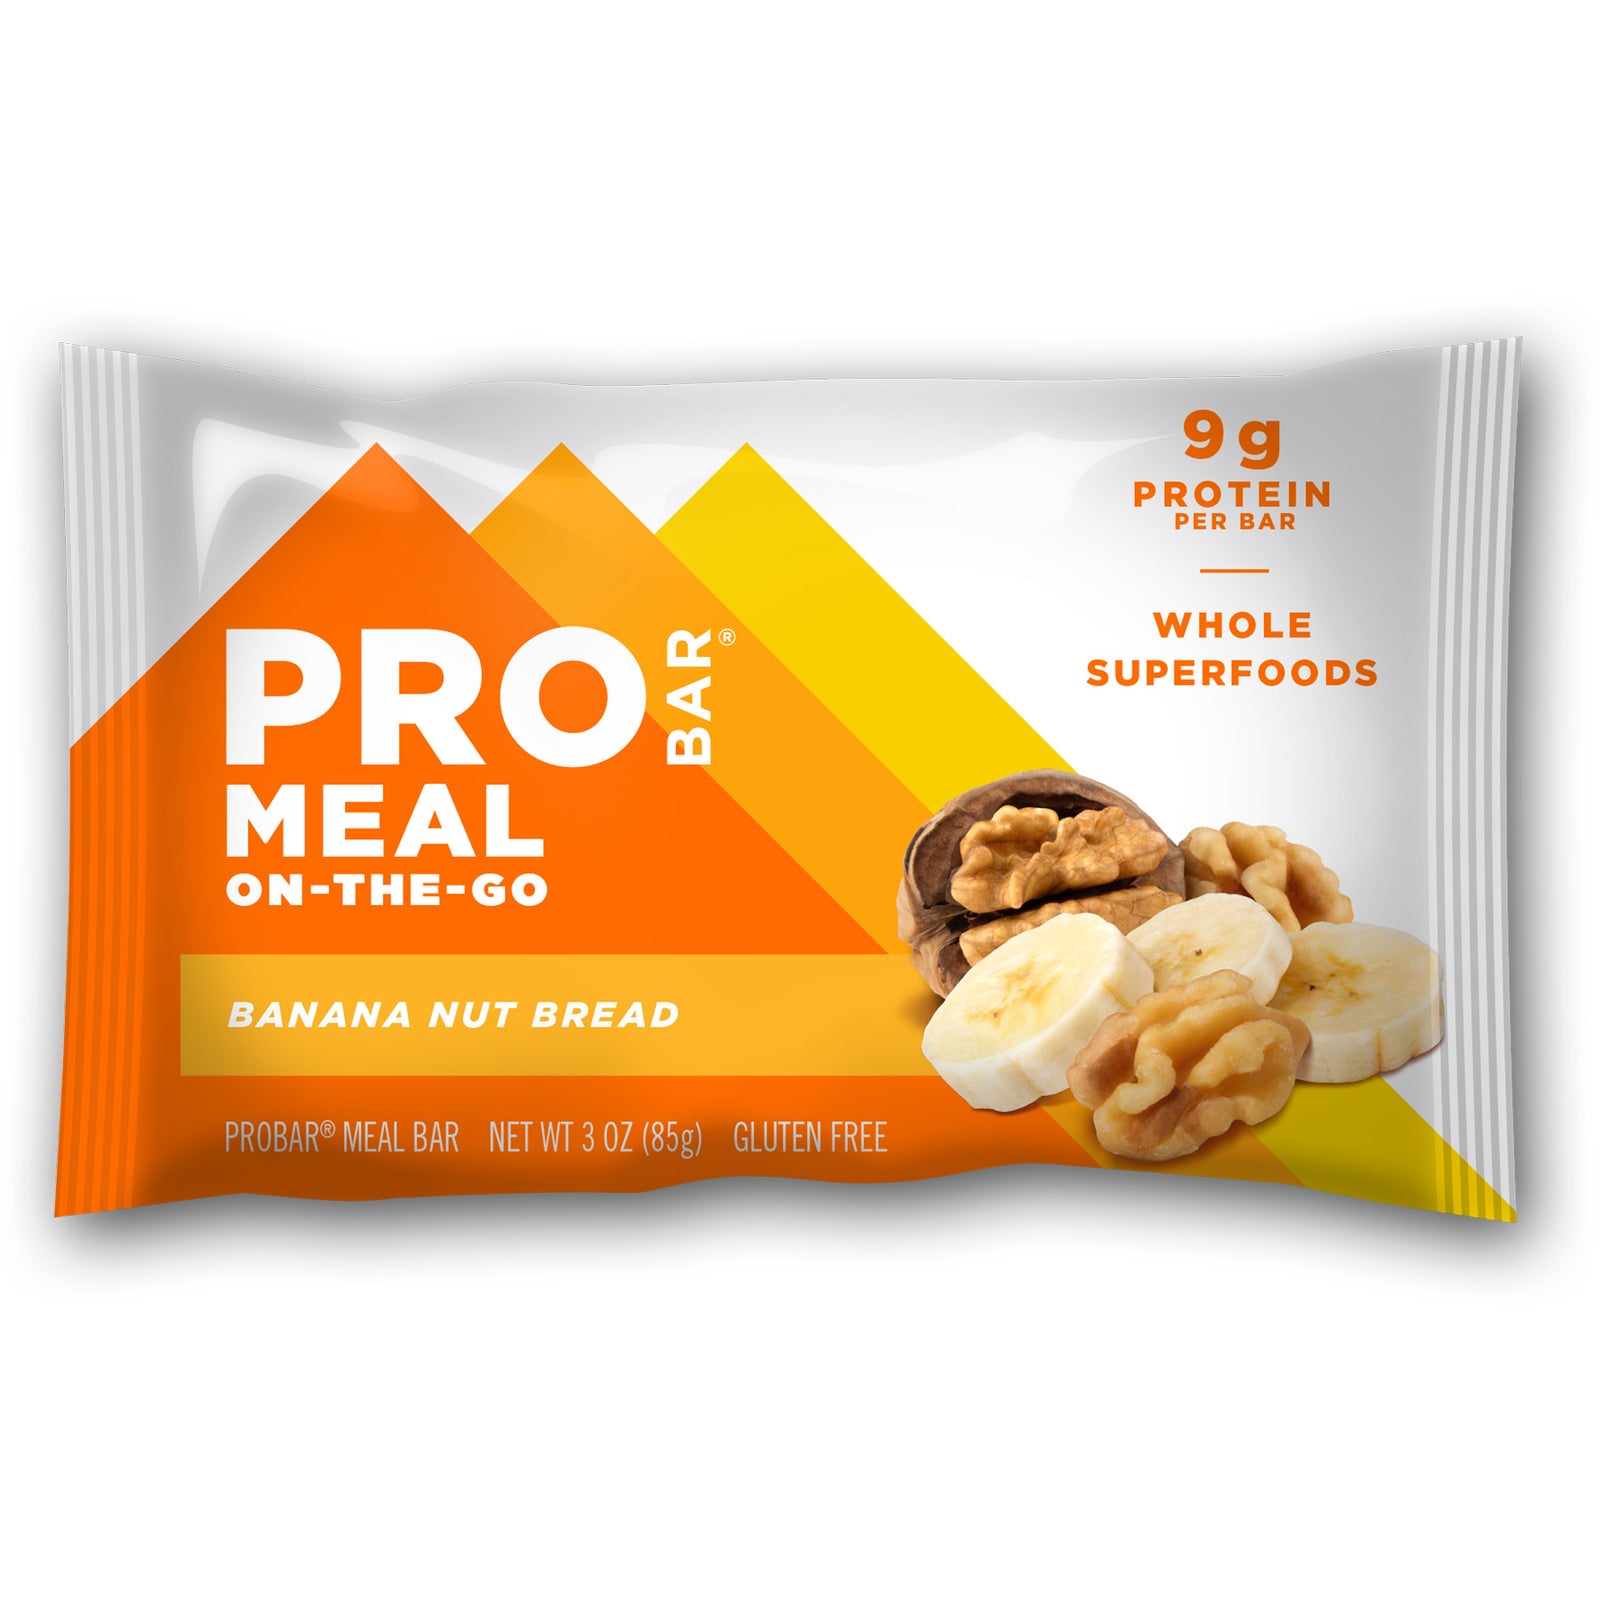 The front of the probar banana nut bread bar